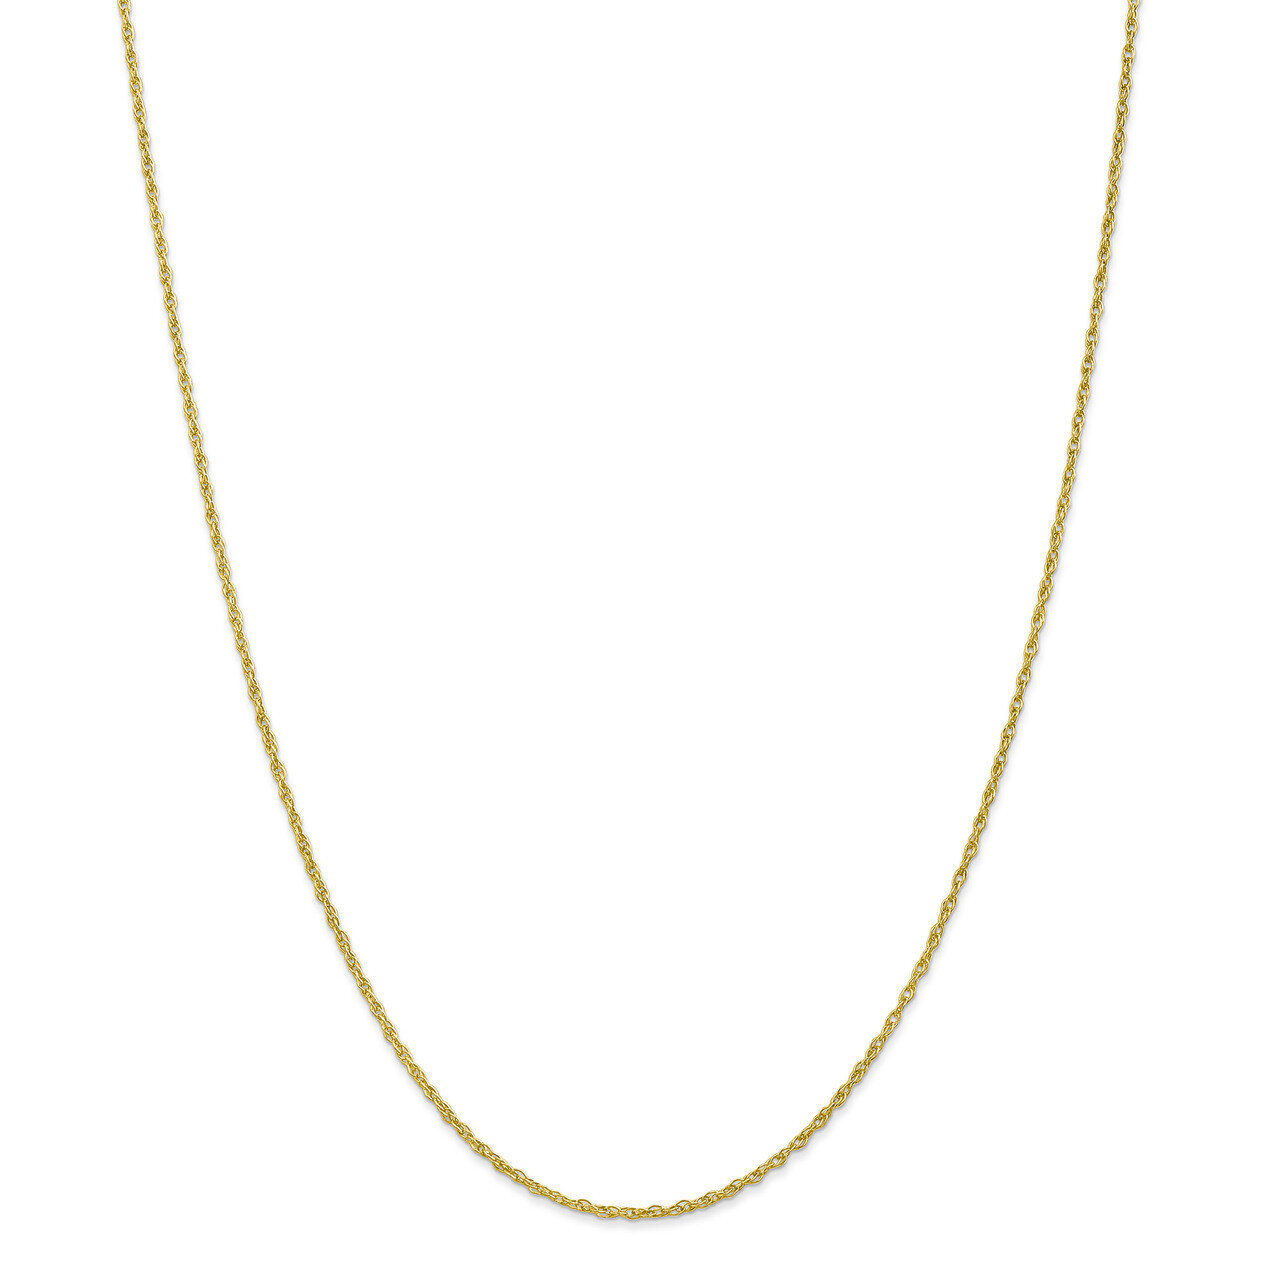 16 Inch 1.3mm Heavy-Baby Rope Chain 10k Gold 10PE6-16